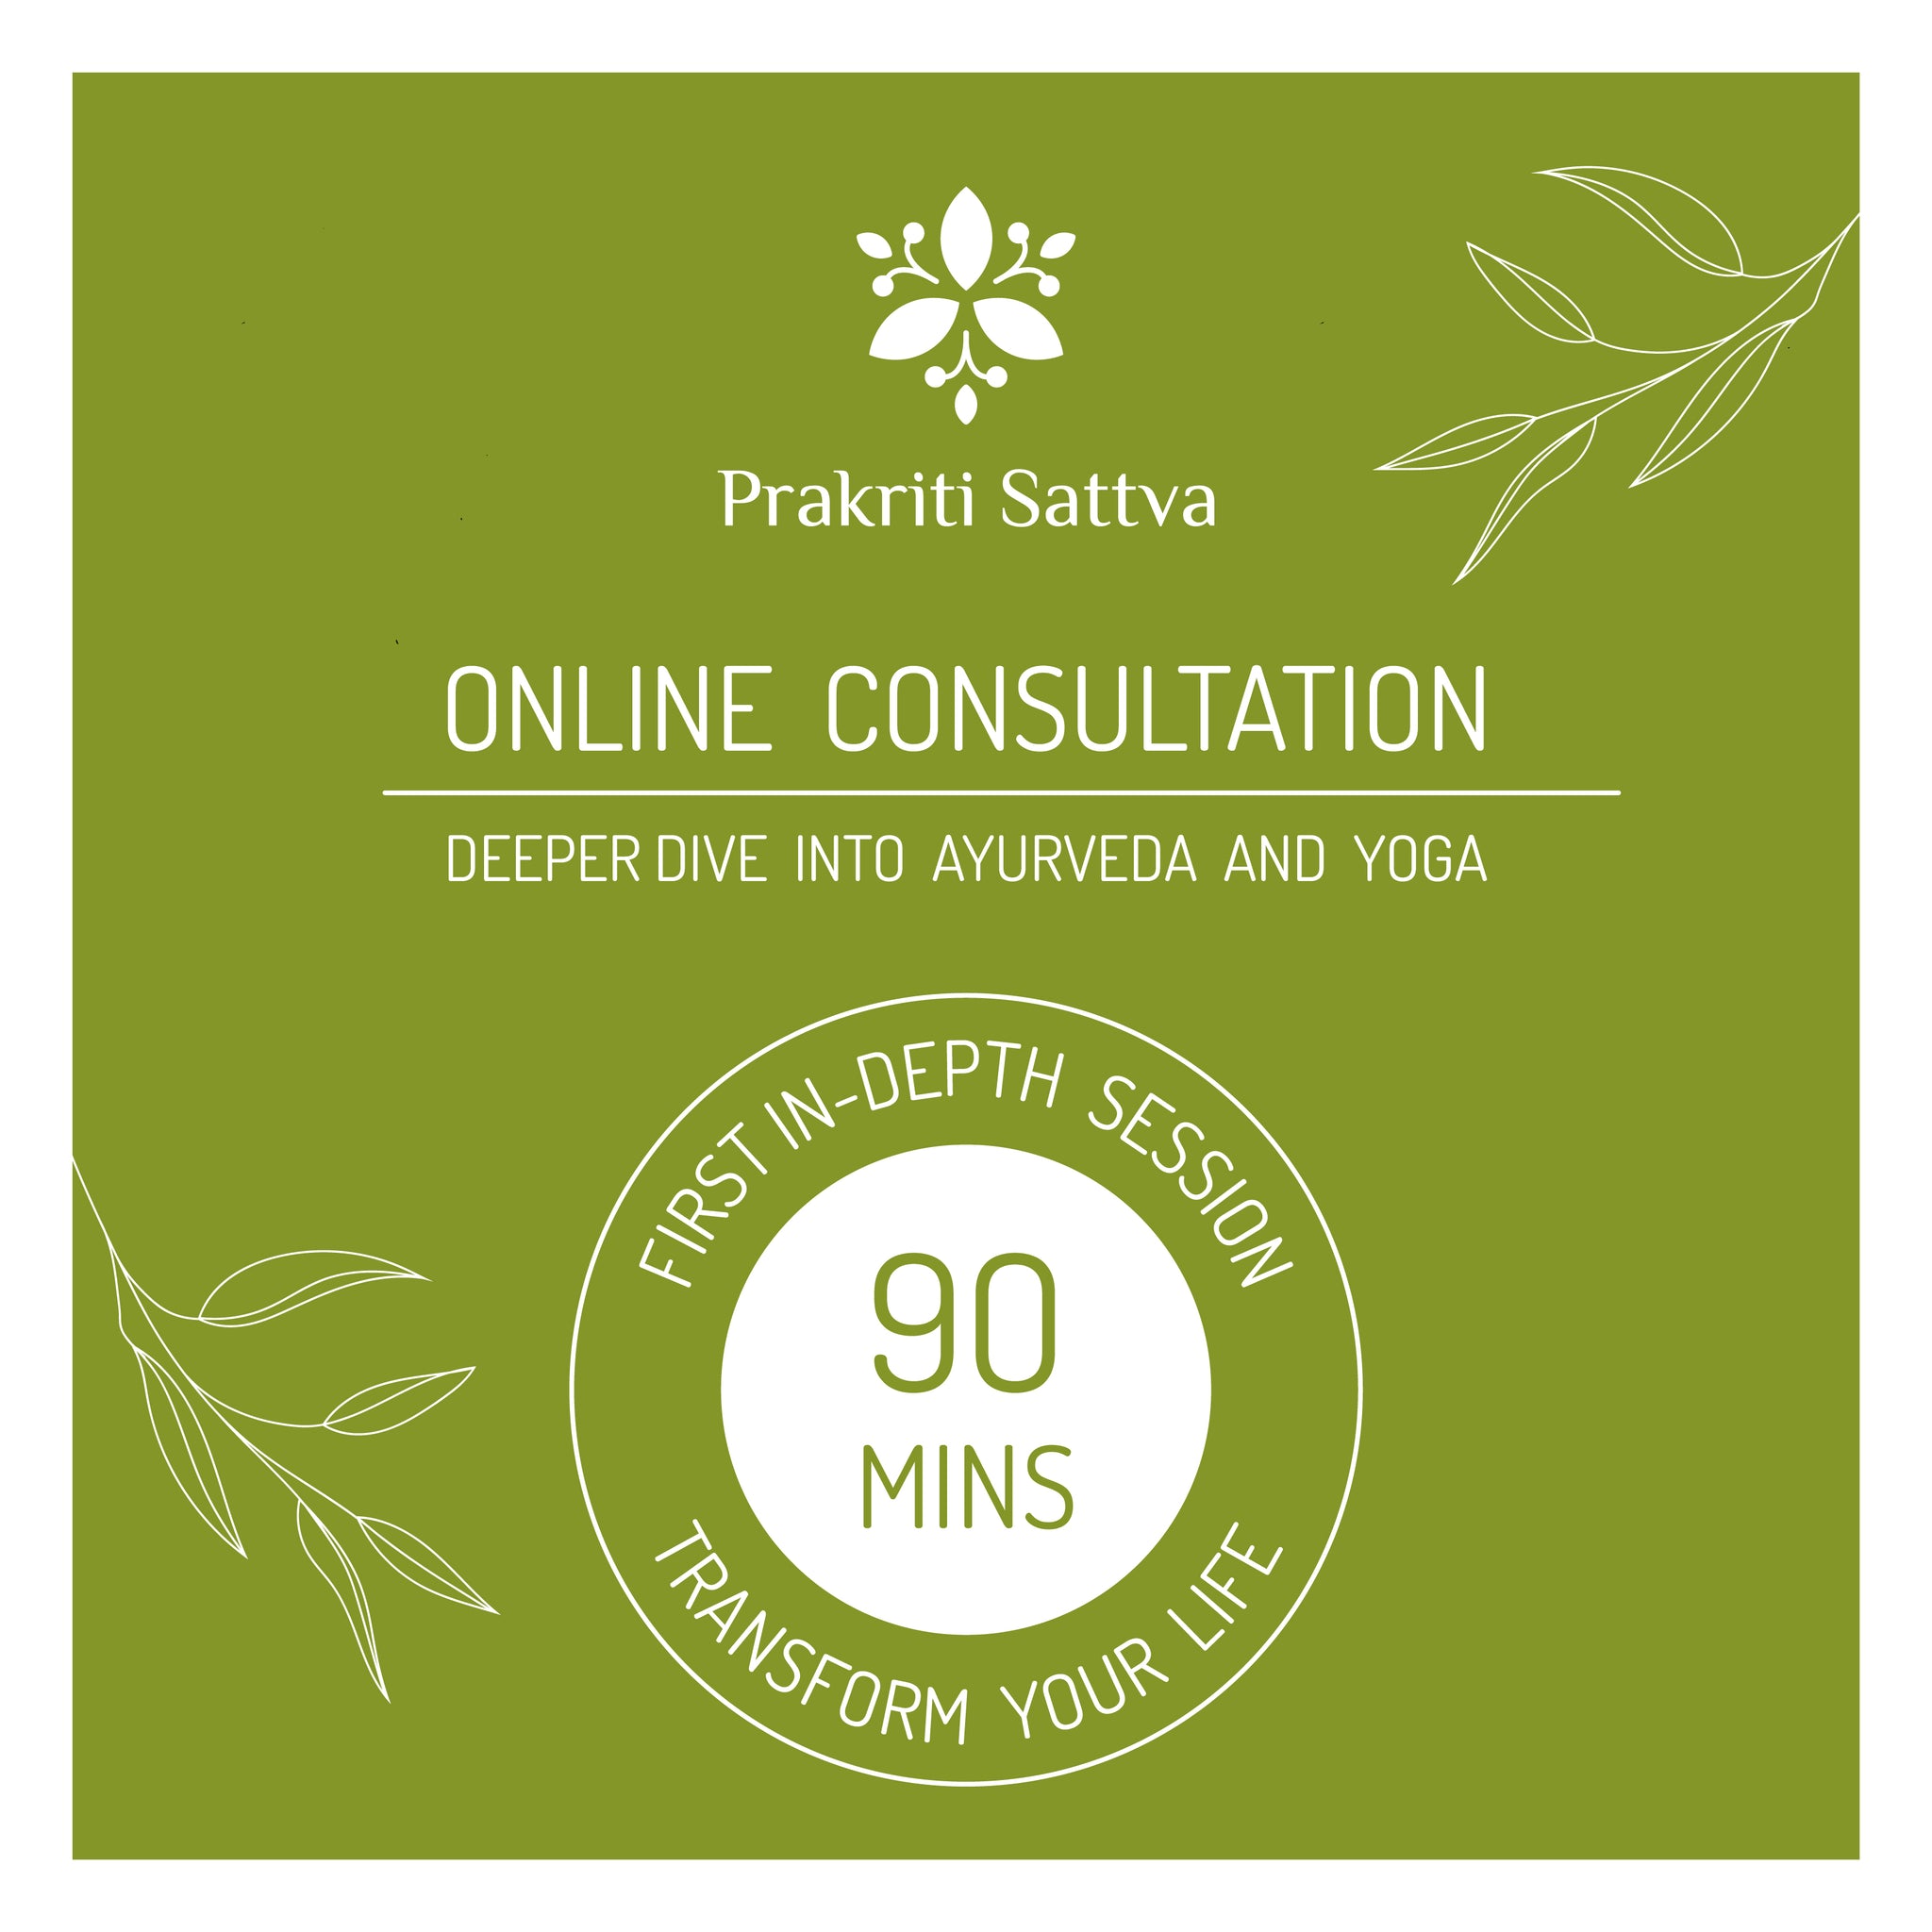 Follow up Ayurveda and Yoga Consultation - 90 minutes - Online